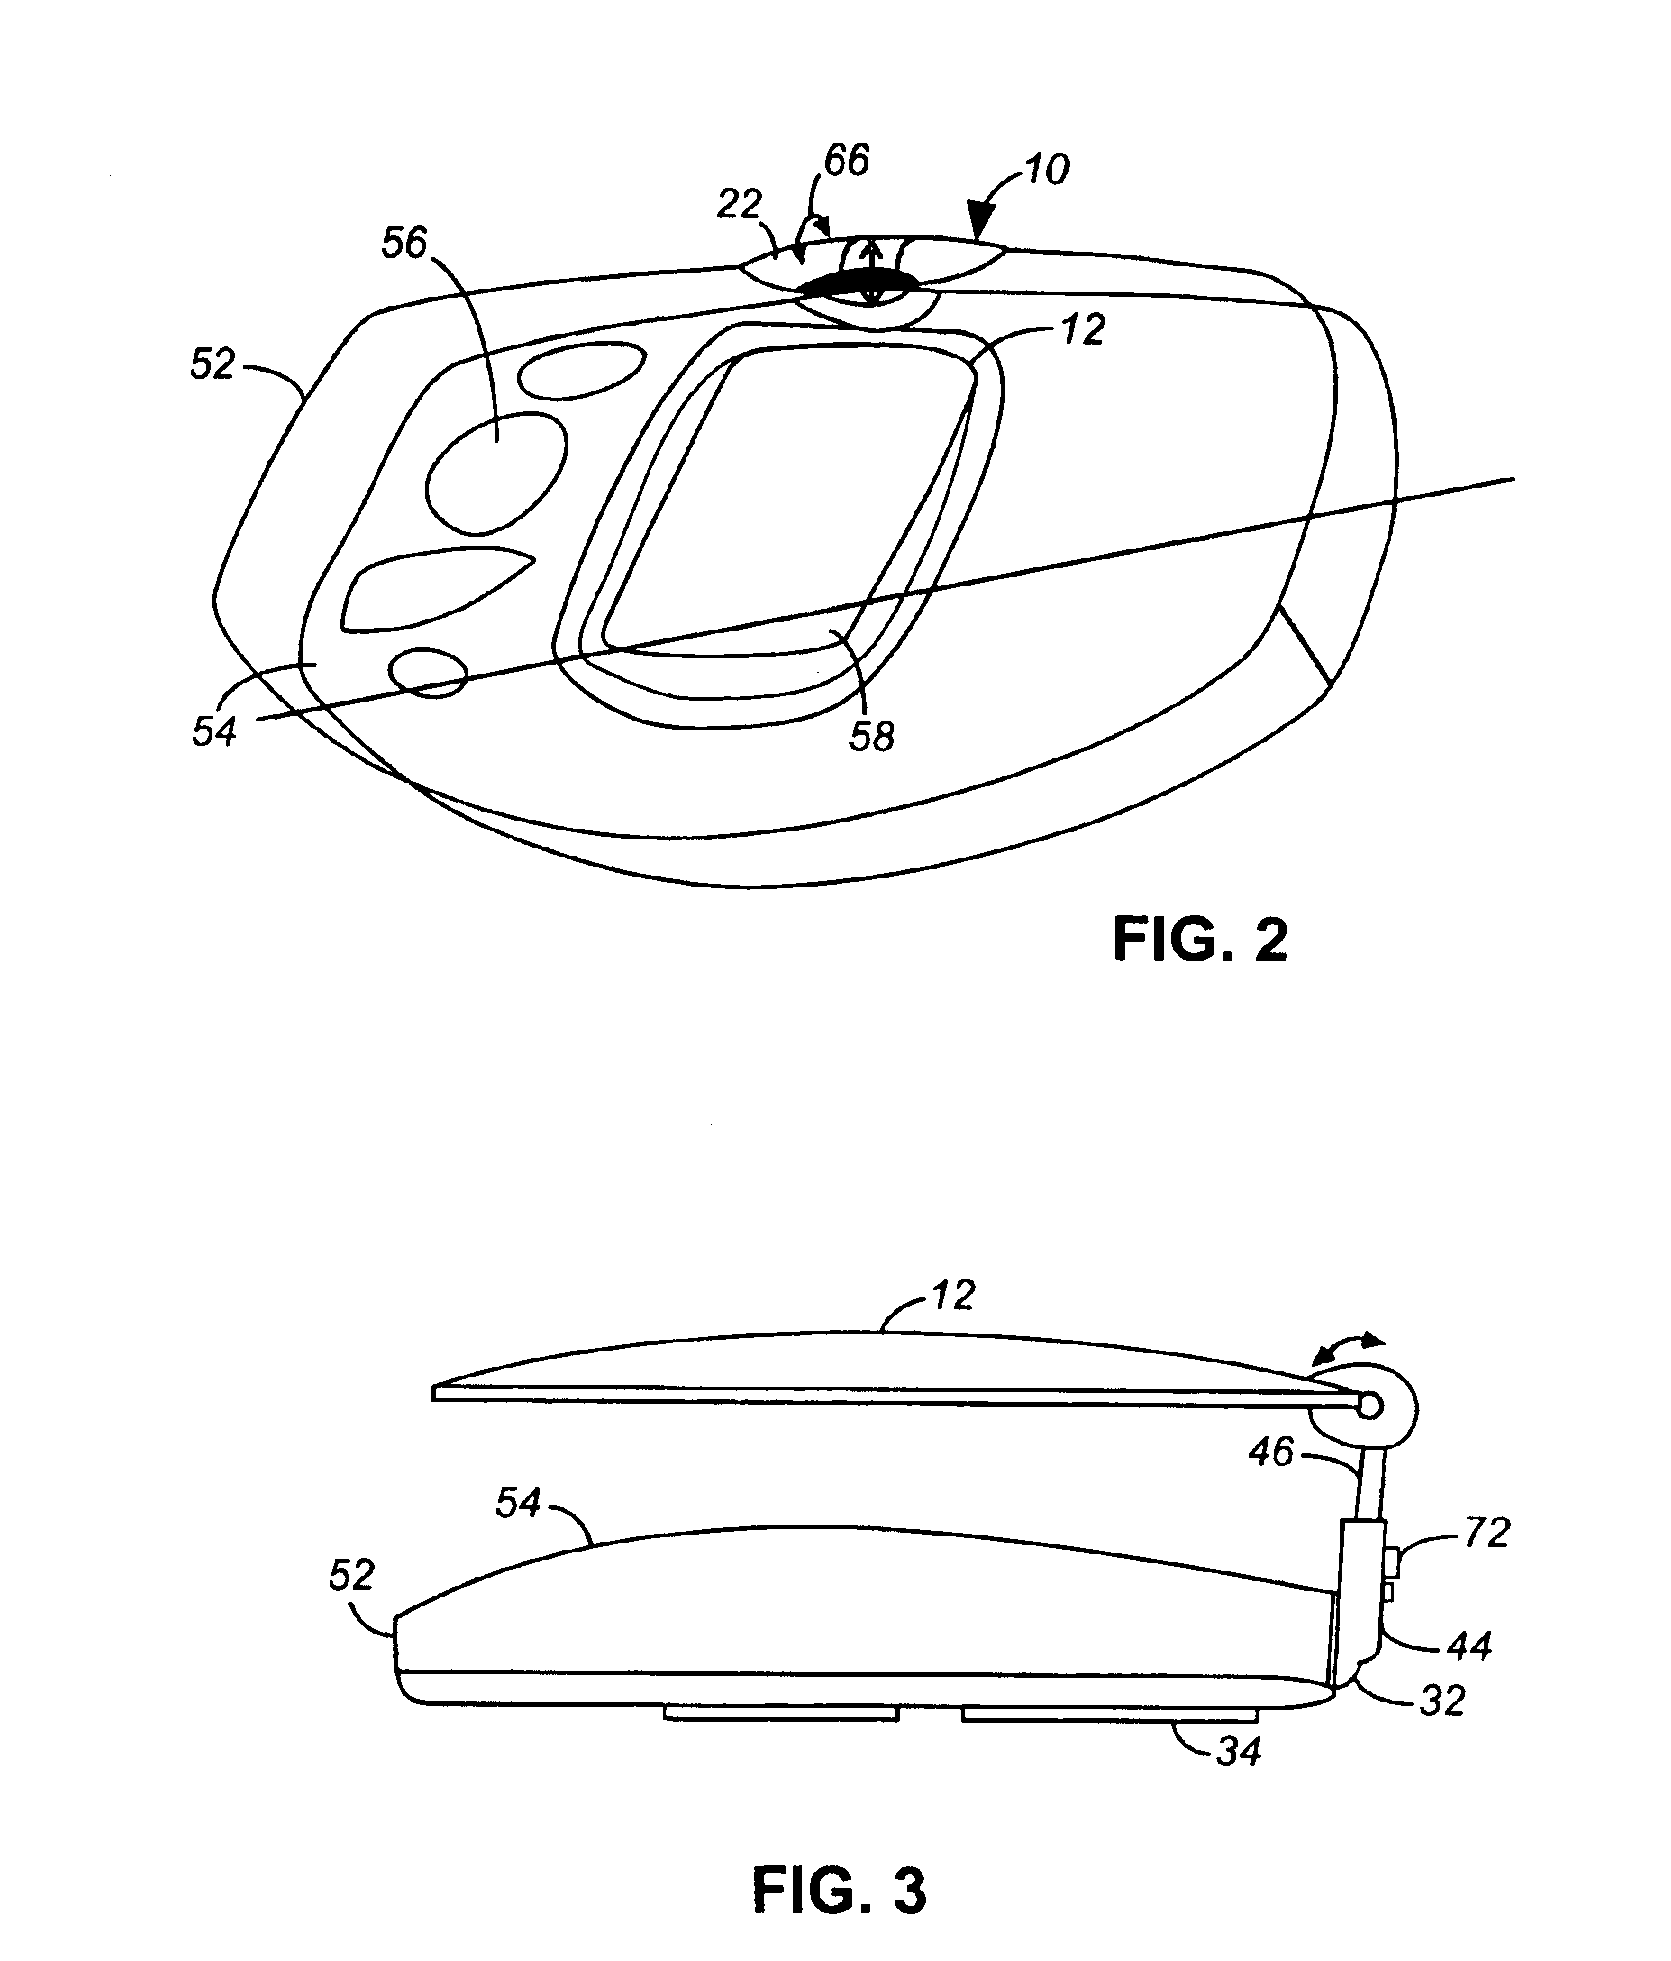 Apparatus for viewing a display of a portable communication device